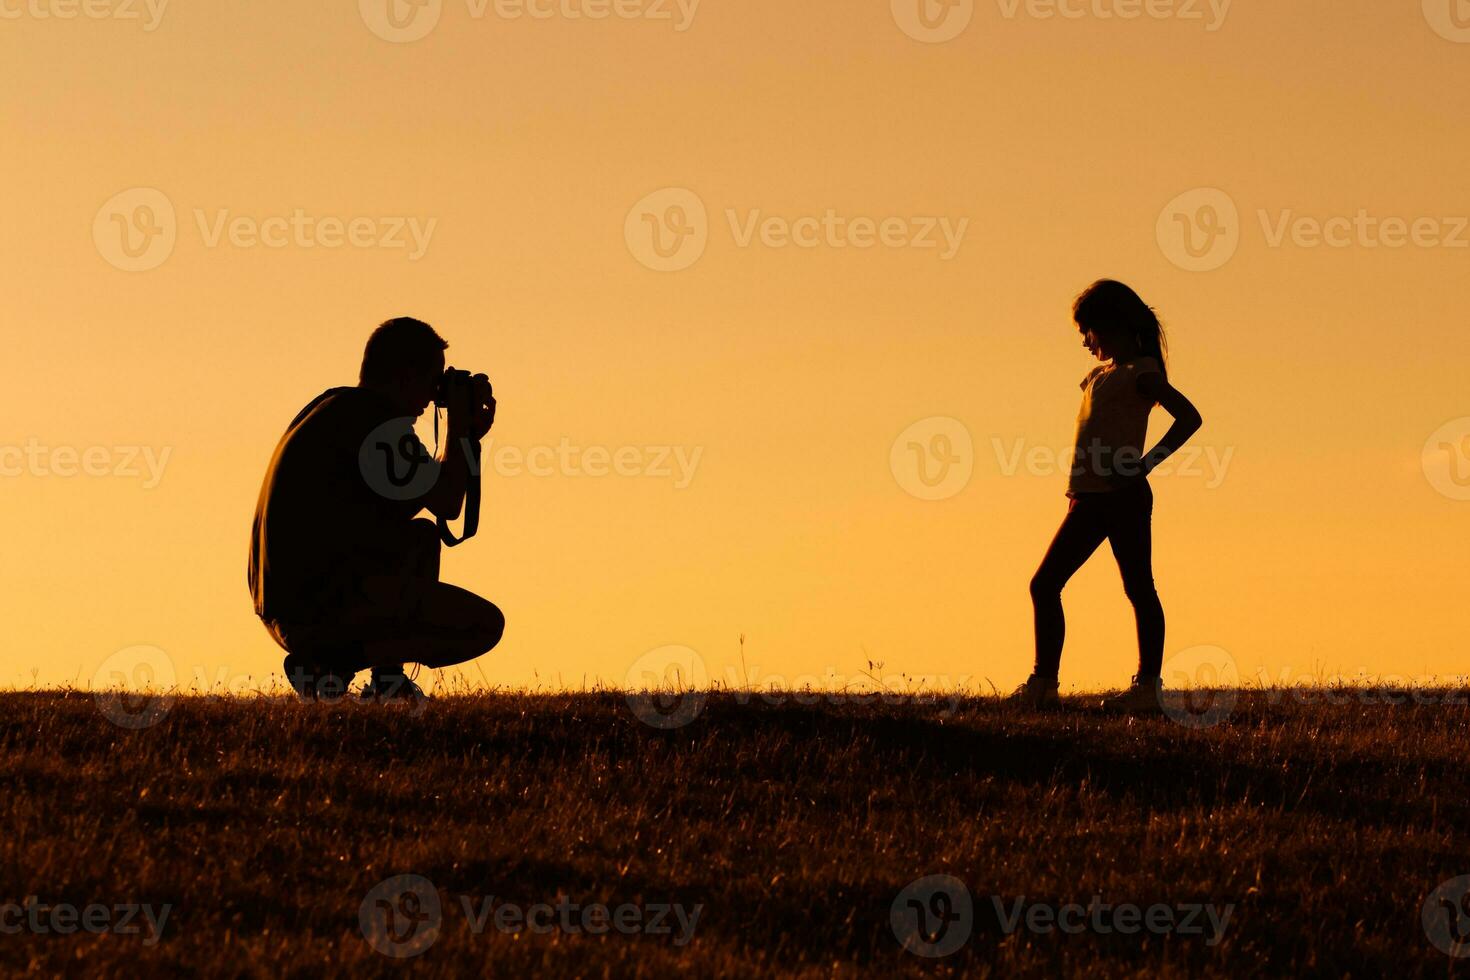 Silhouette of a father photographing daughter photo